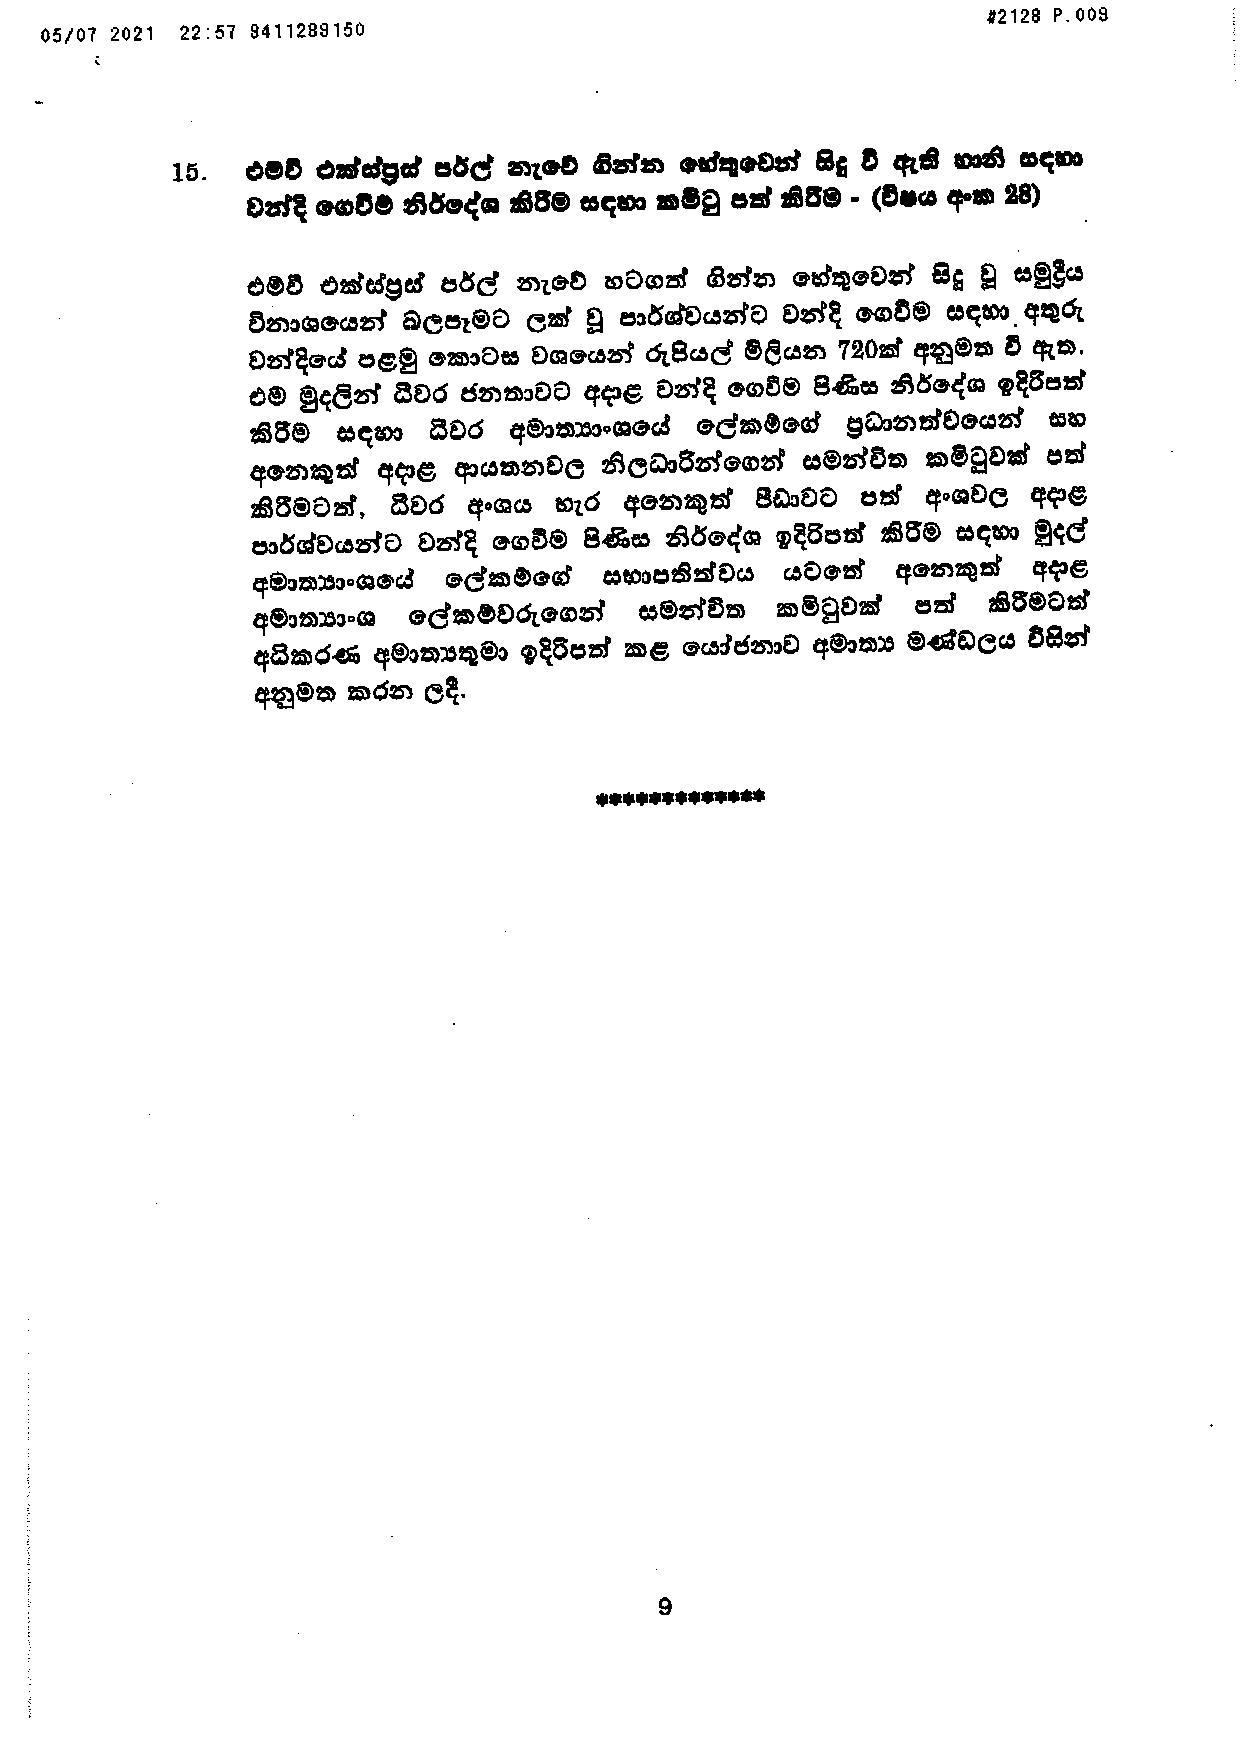 Cabinet Decision on 05.07.2021 page 009